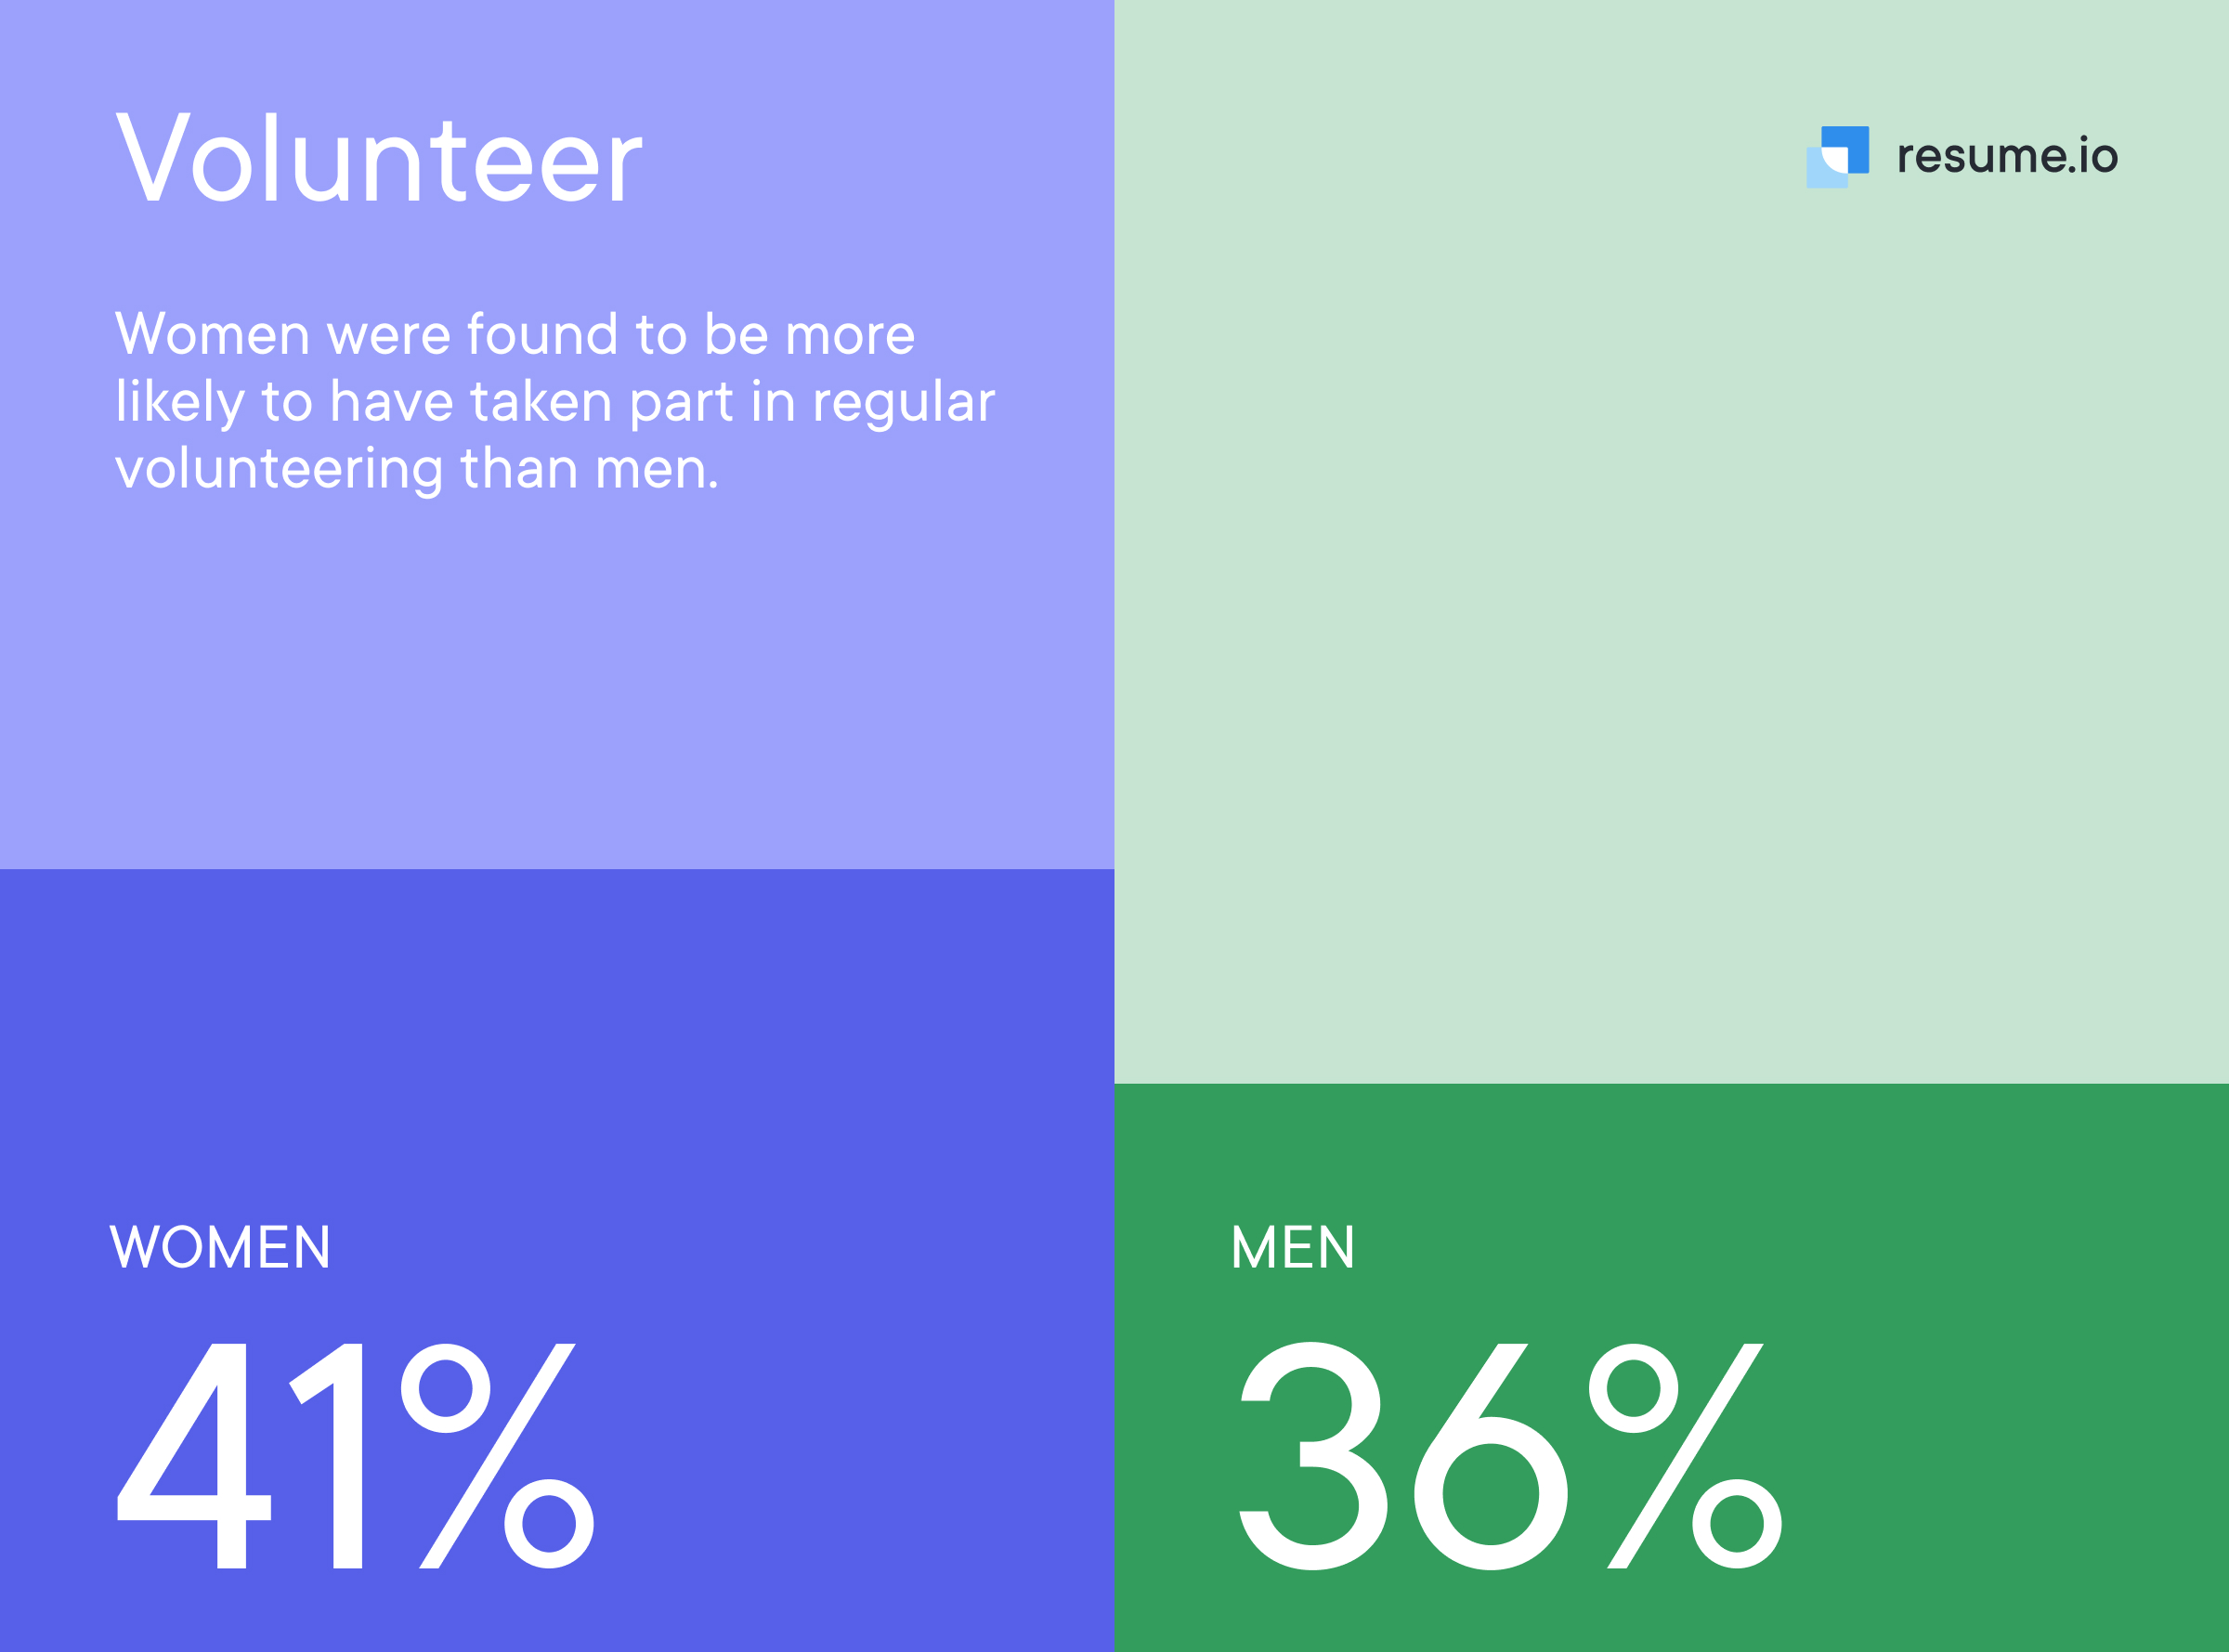 Woman were found to be more likely to have taken part in regular volunteering than men